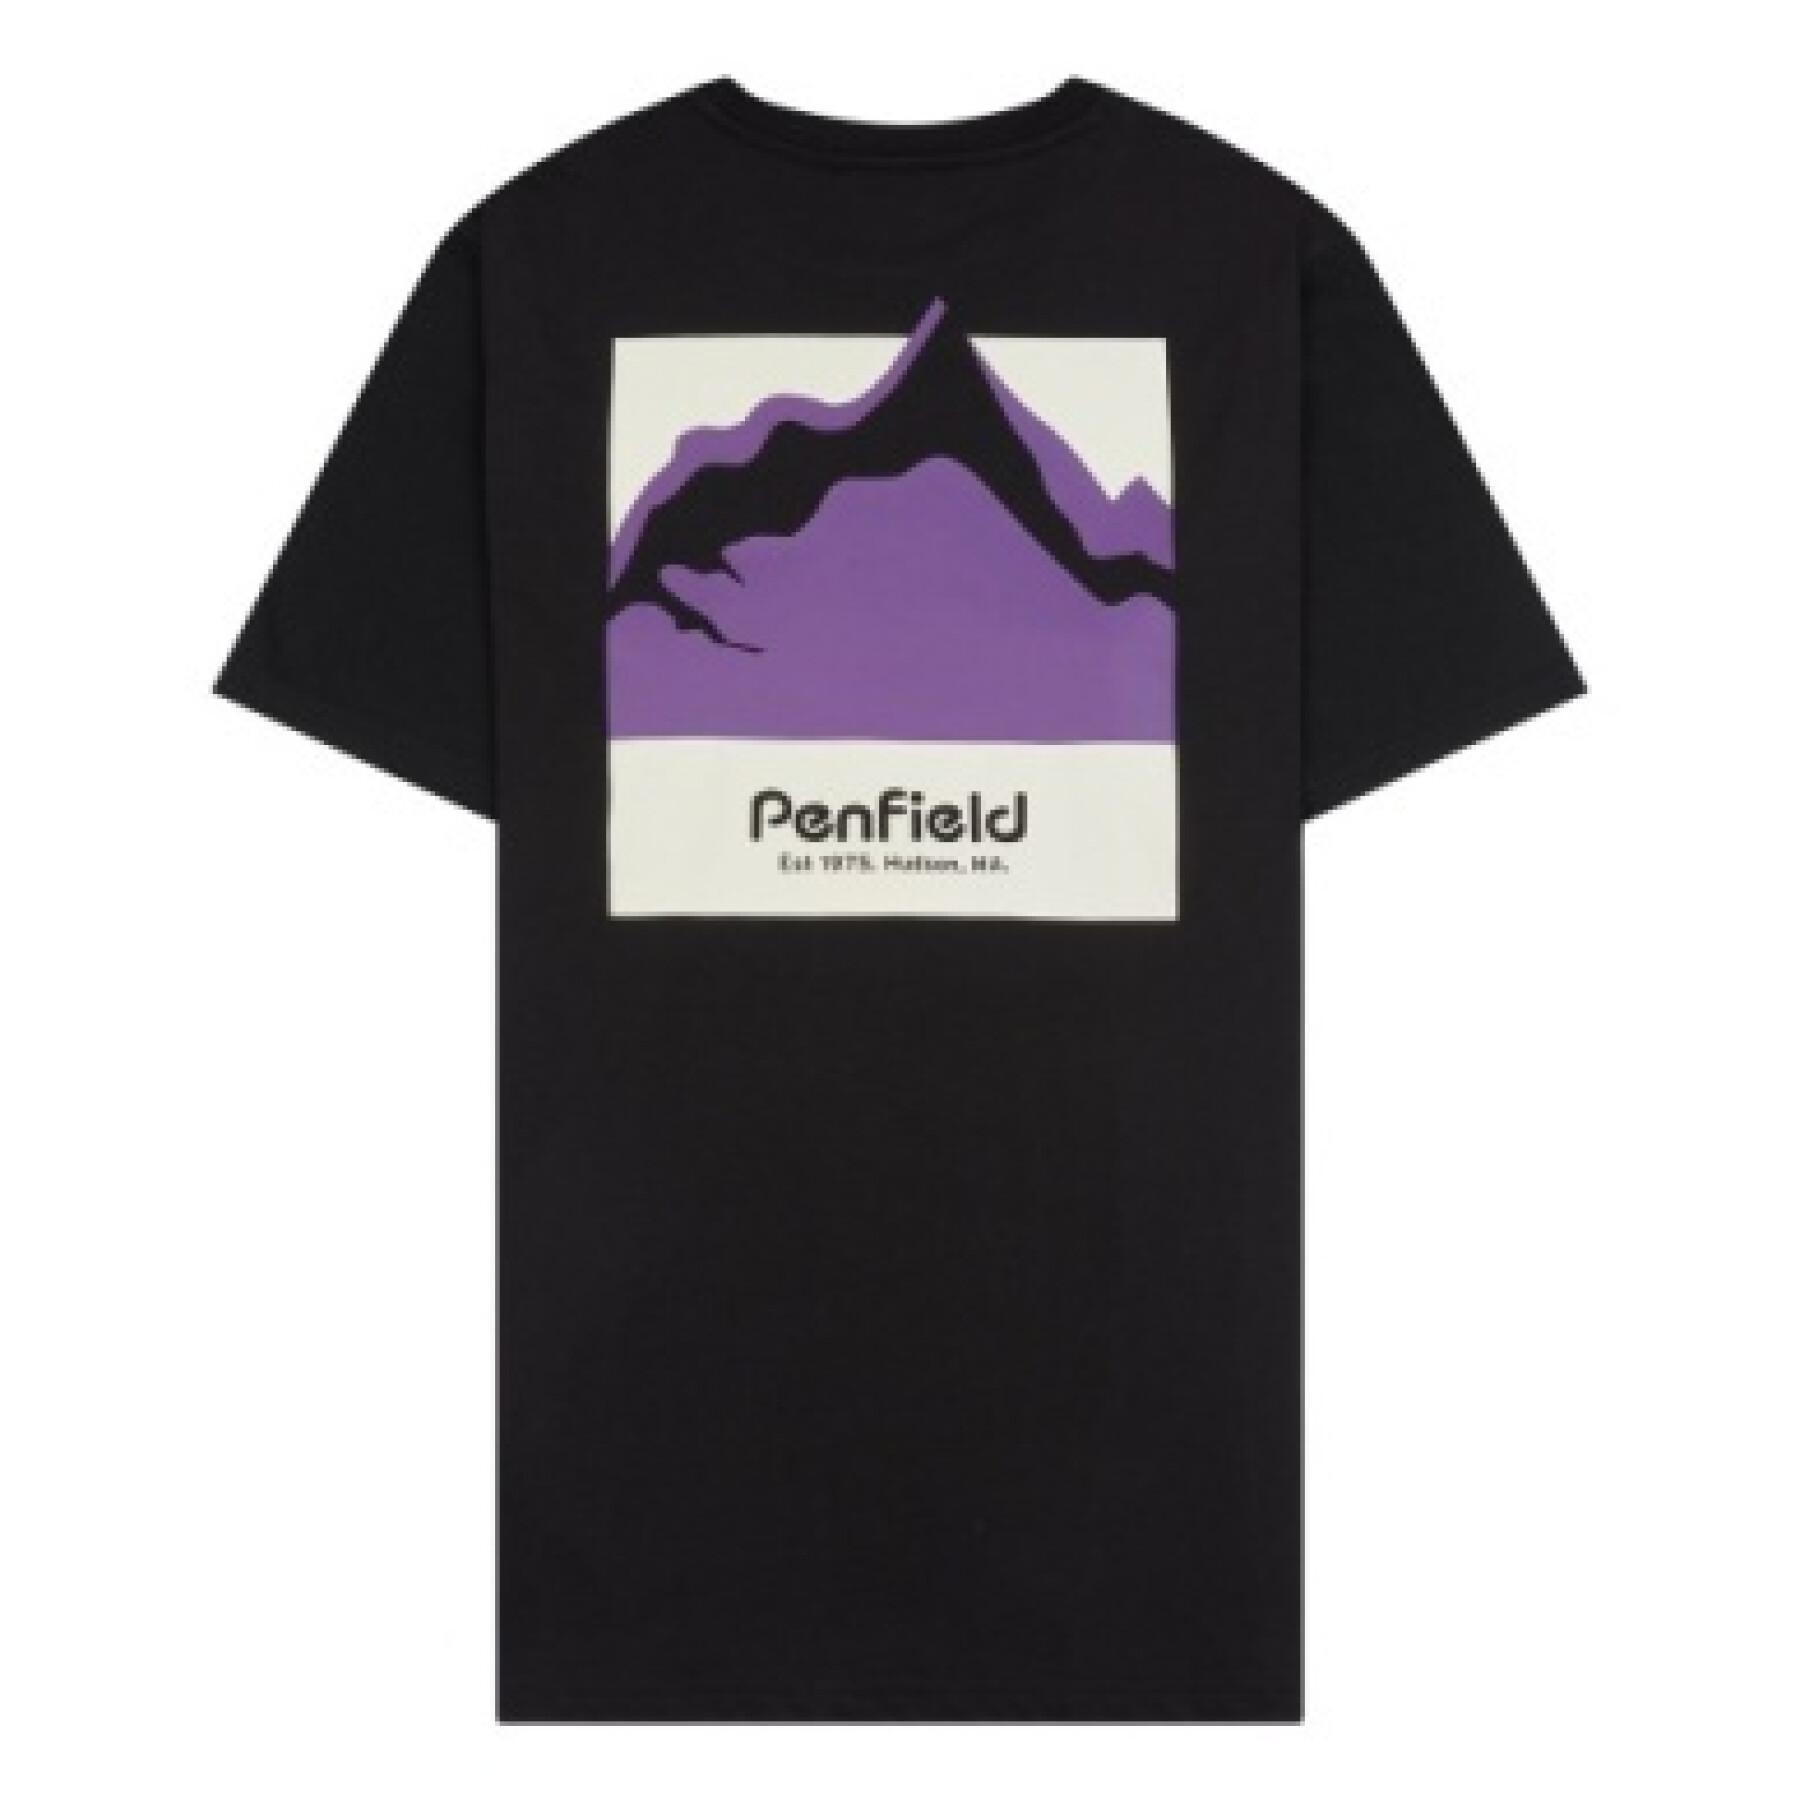 Camiseta oversize mujer Penfield montain graphic